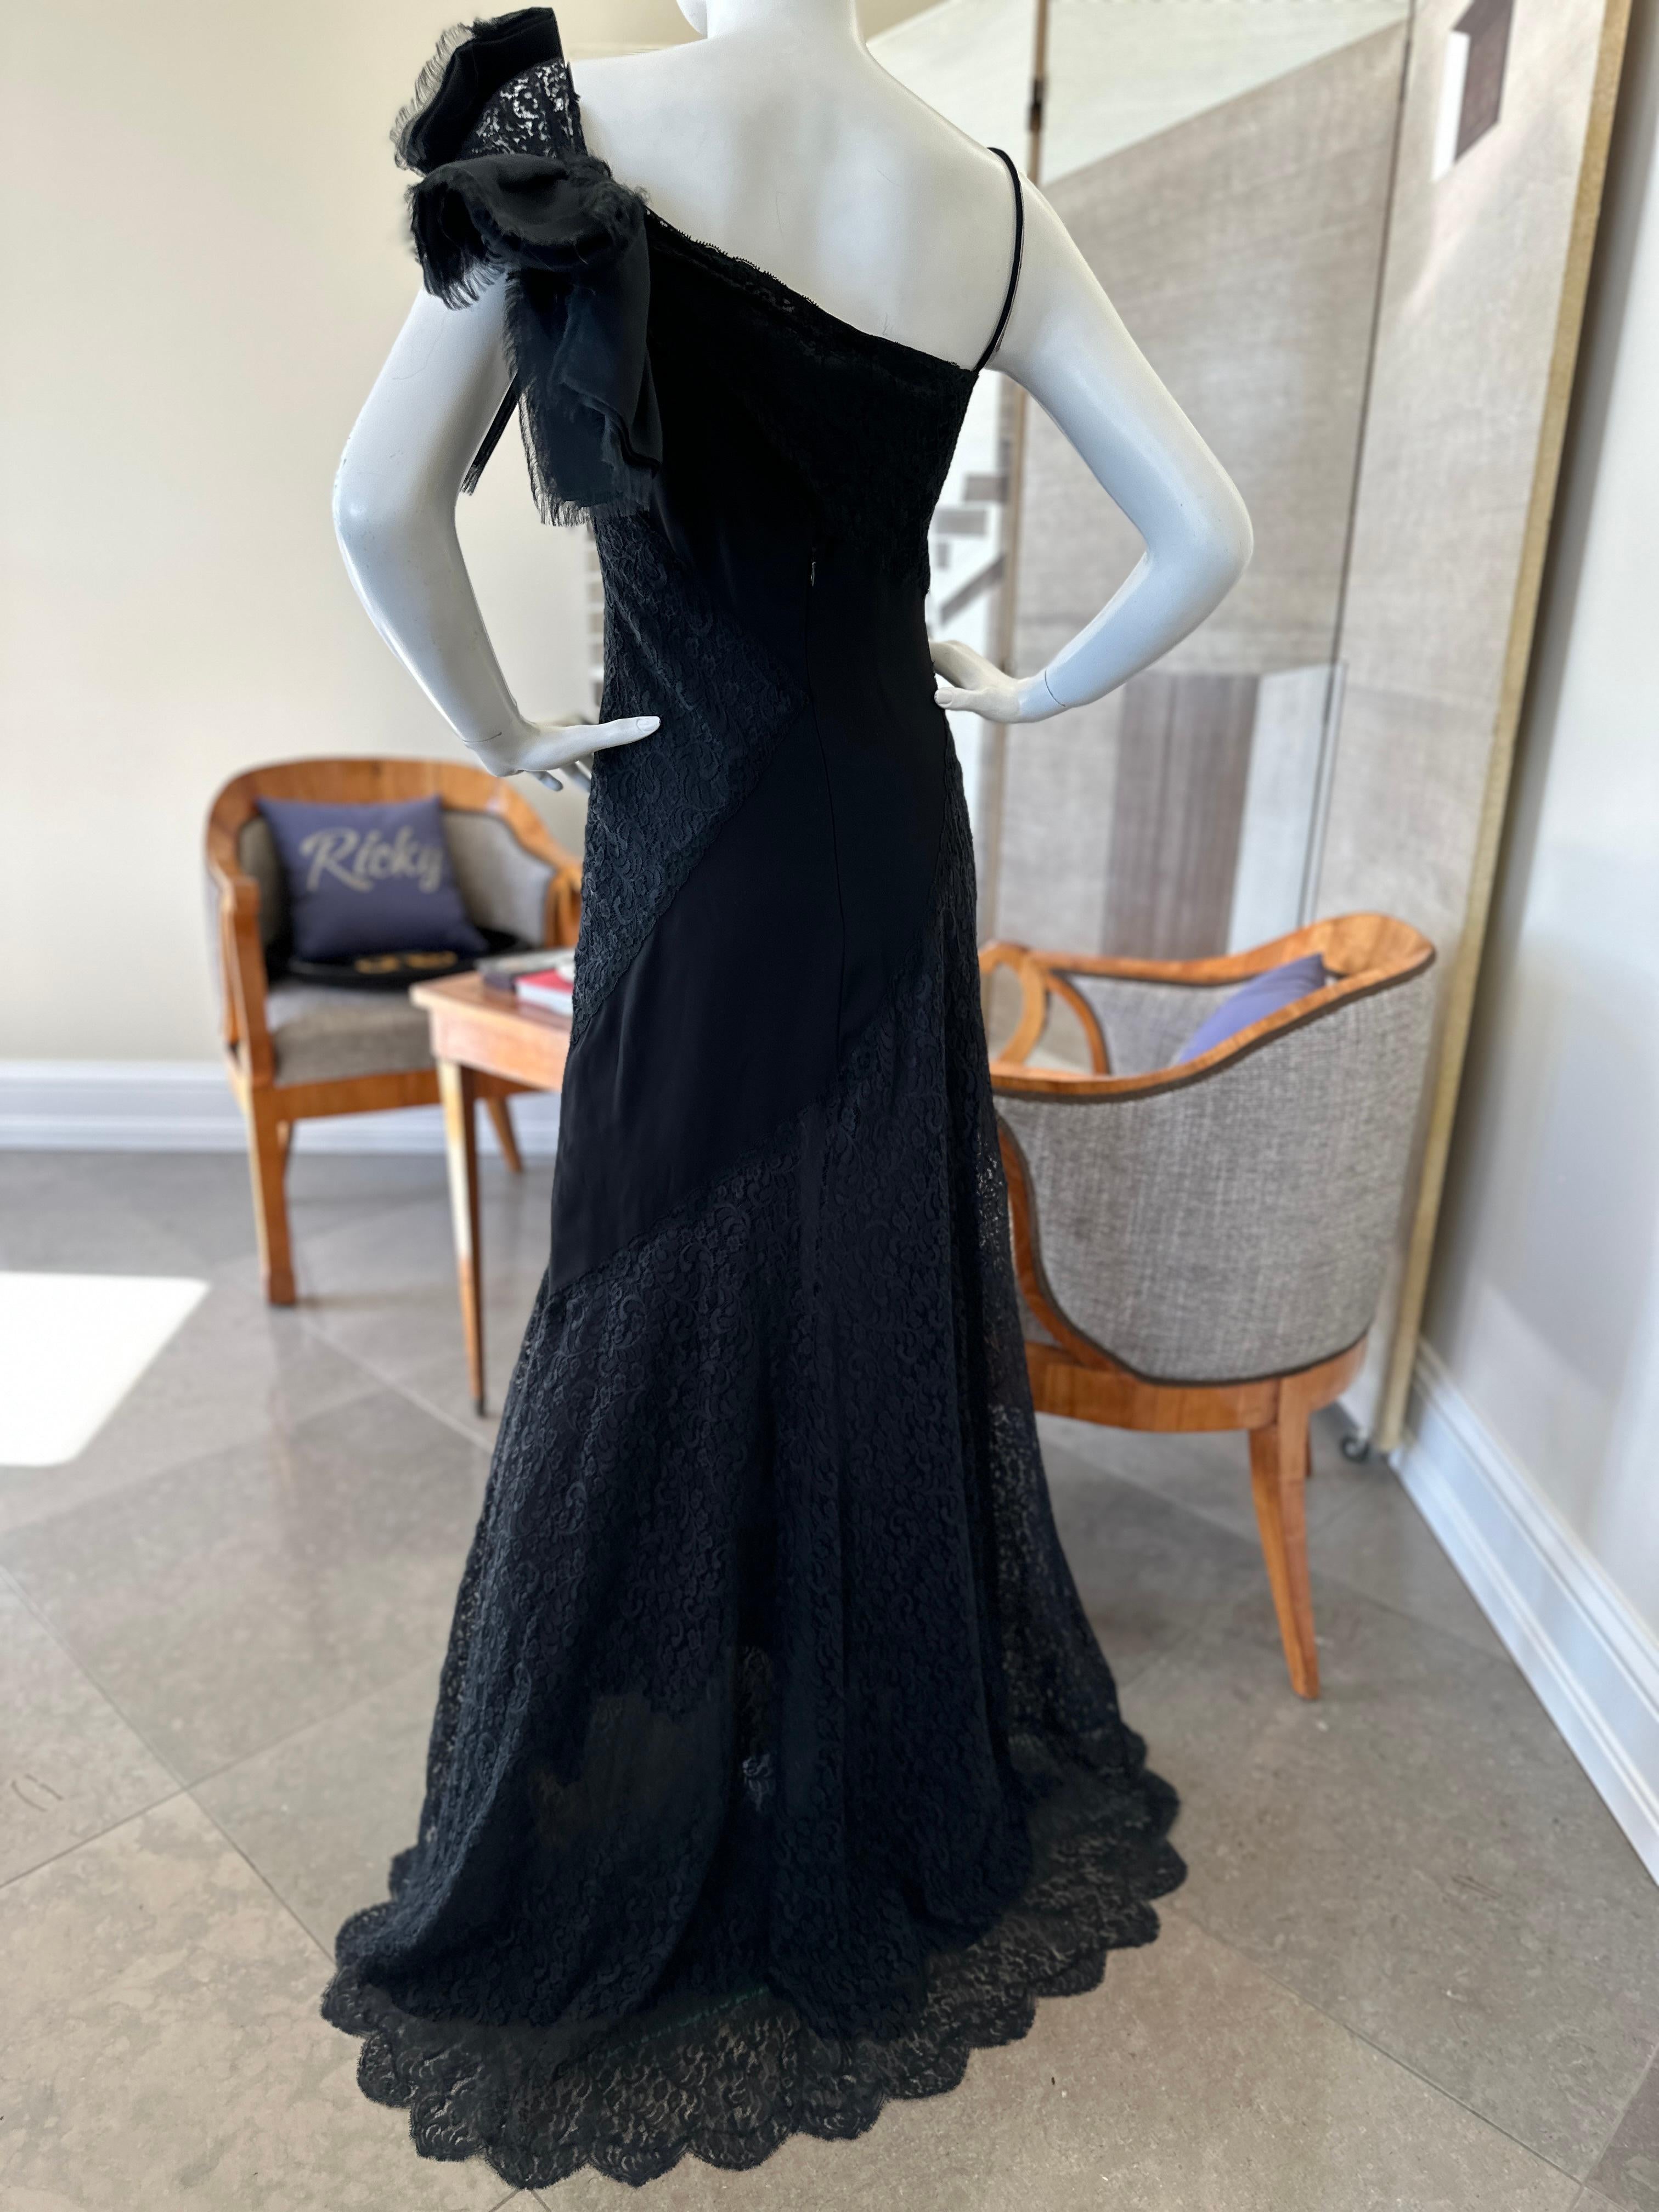 Valentino Vintage 1990's Sheer Lace Evening Dress with Scallop Edge Hem In Excellent Condition For Sale In Cloverdale, CA